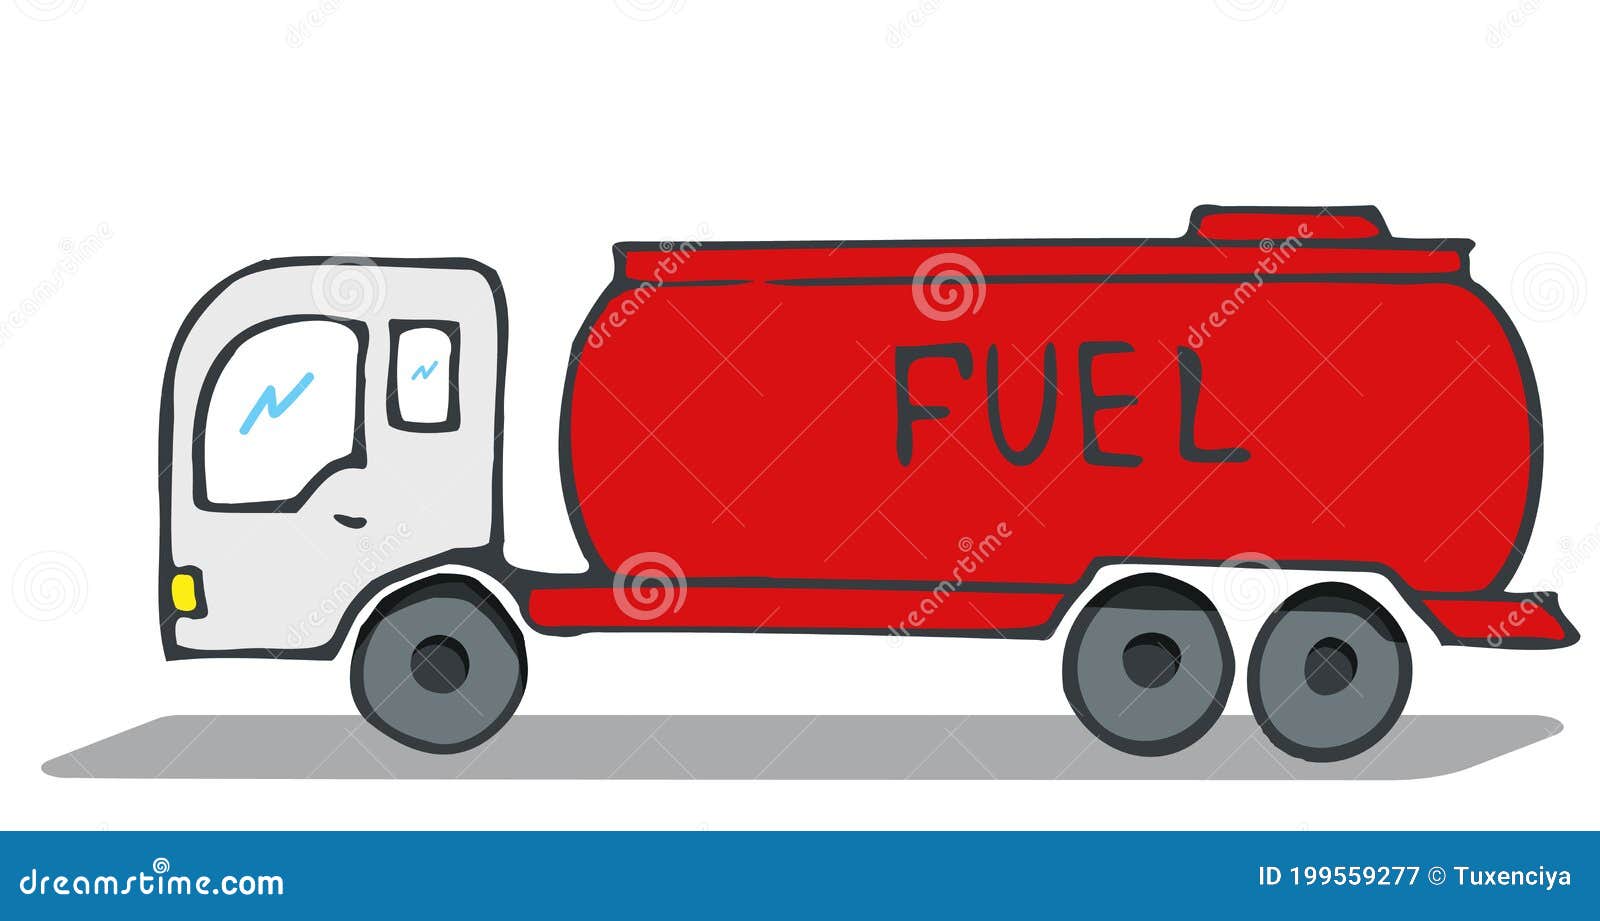 Fuel tanker truck icon, outline style. Fuel tanker truck icon. outline  illustration of fuel tanker truck vector icon for | CanStock